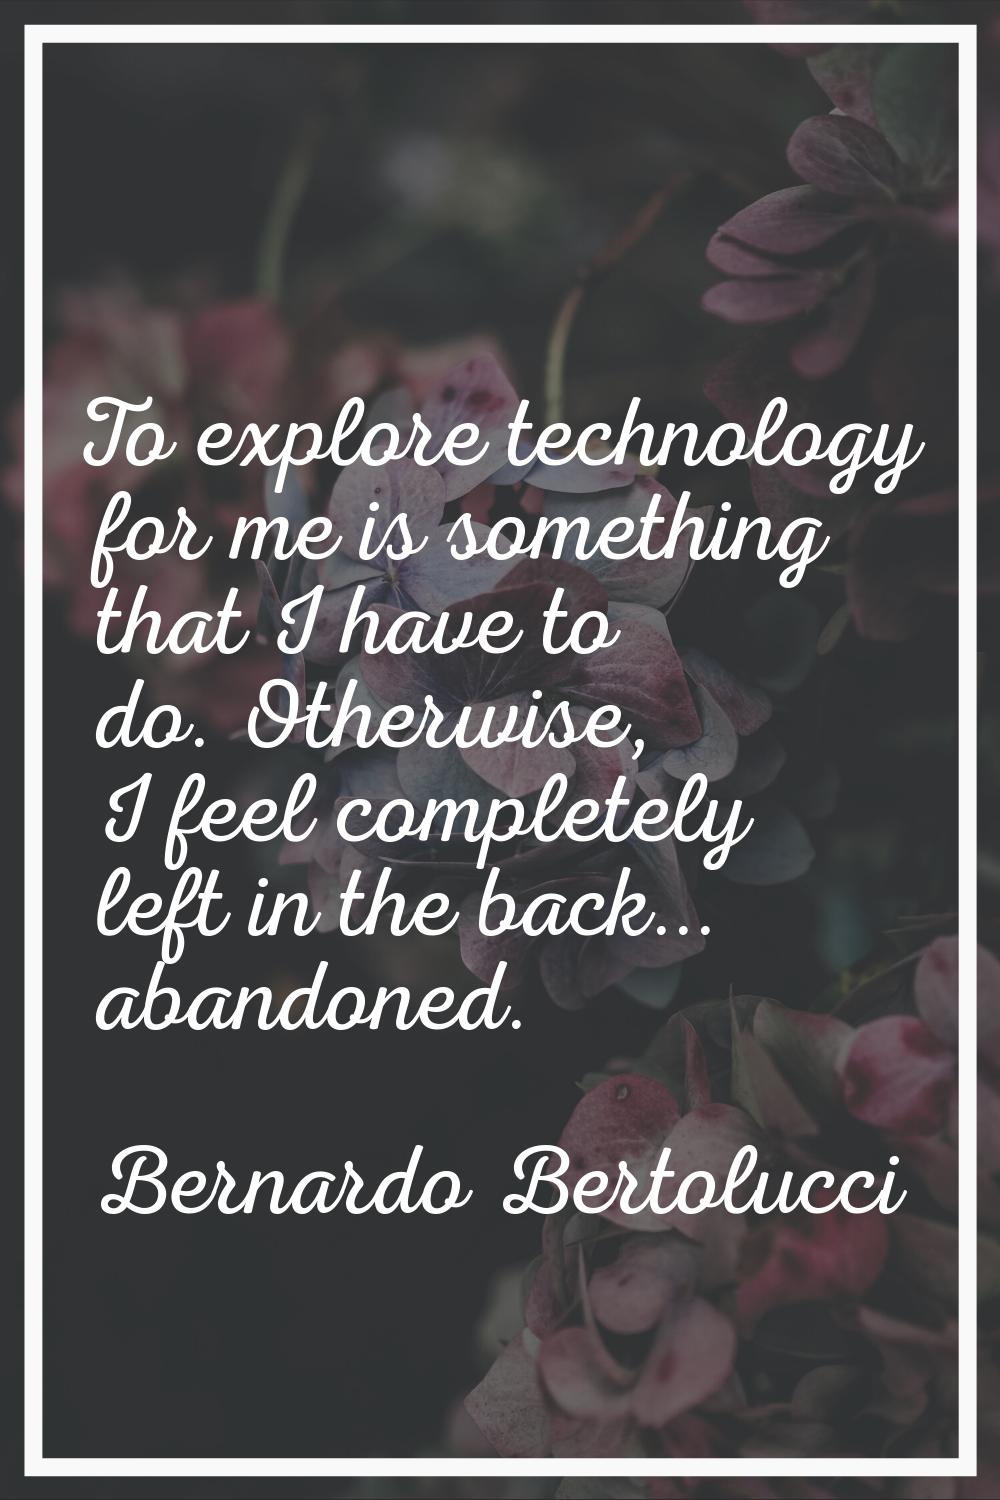 To explore technology for me is something that I have to do. Otherwise, I feel completely left in t